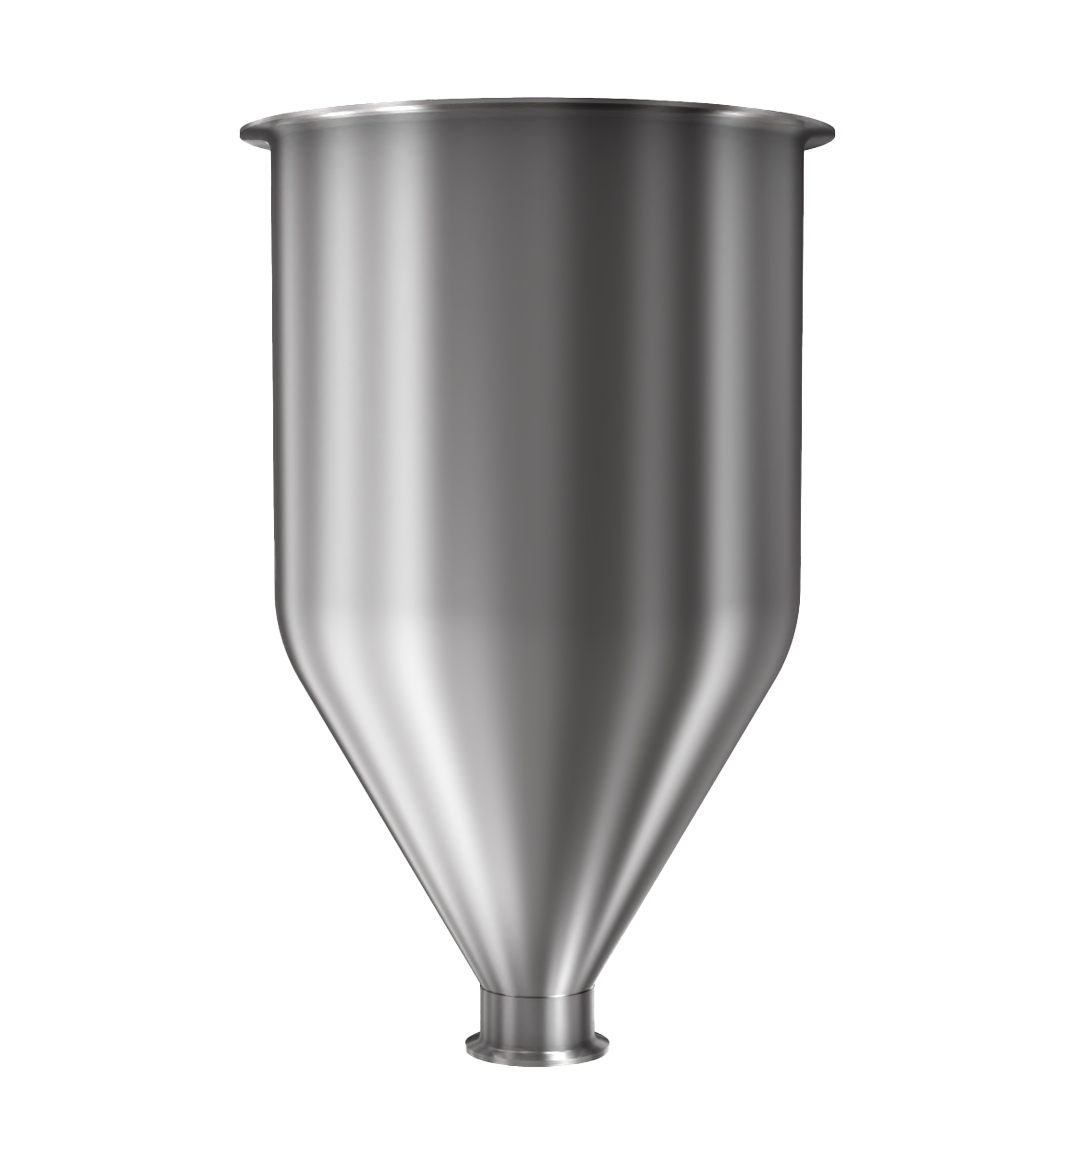 304 Stainless Steel funnel with 1 1/2" sanitary fitting 3 gallons, 8.85" ID x 15.59" OAH